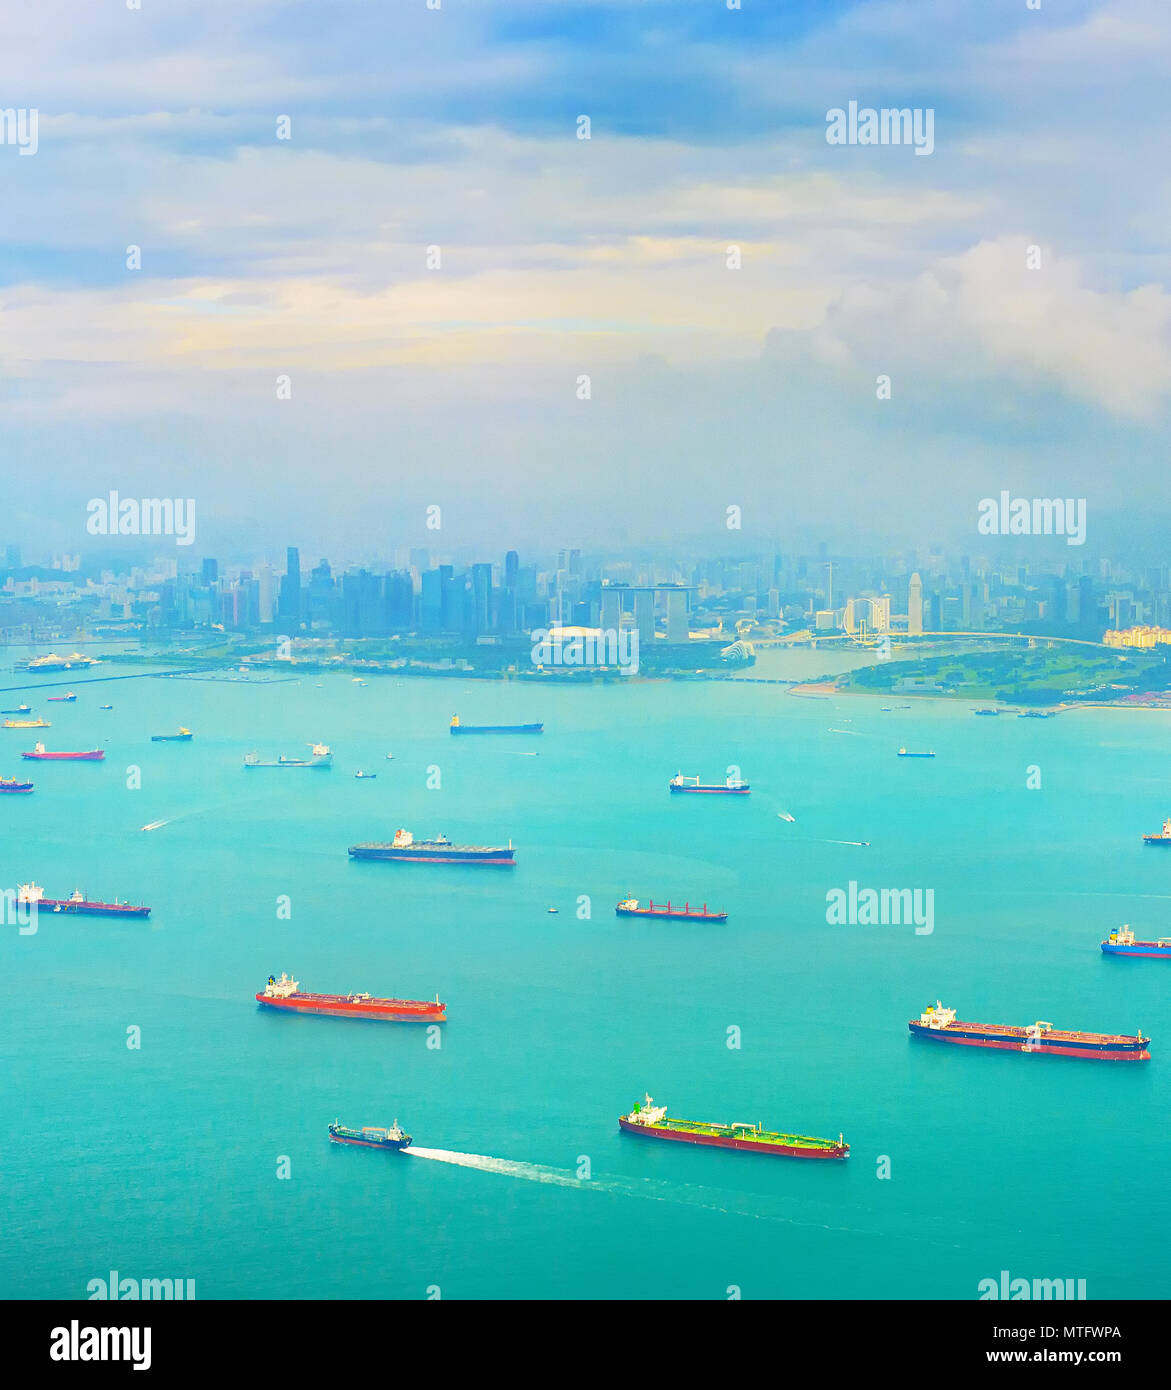 Cargo tanker ships in Singapore harbor. Singapore Downtown in the background Stock Photo